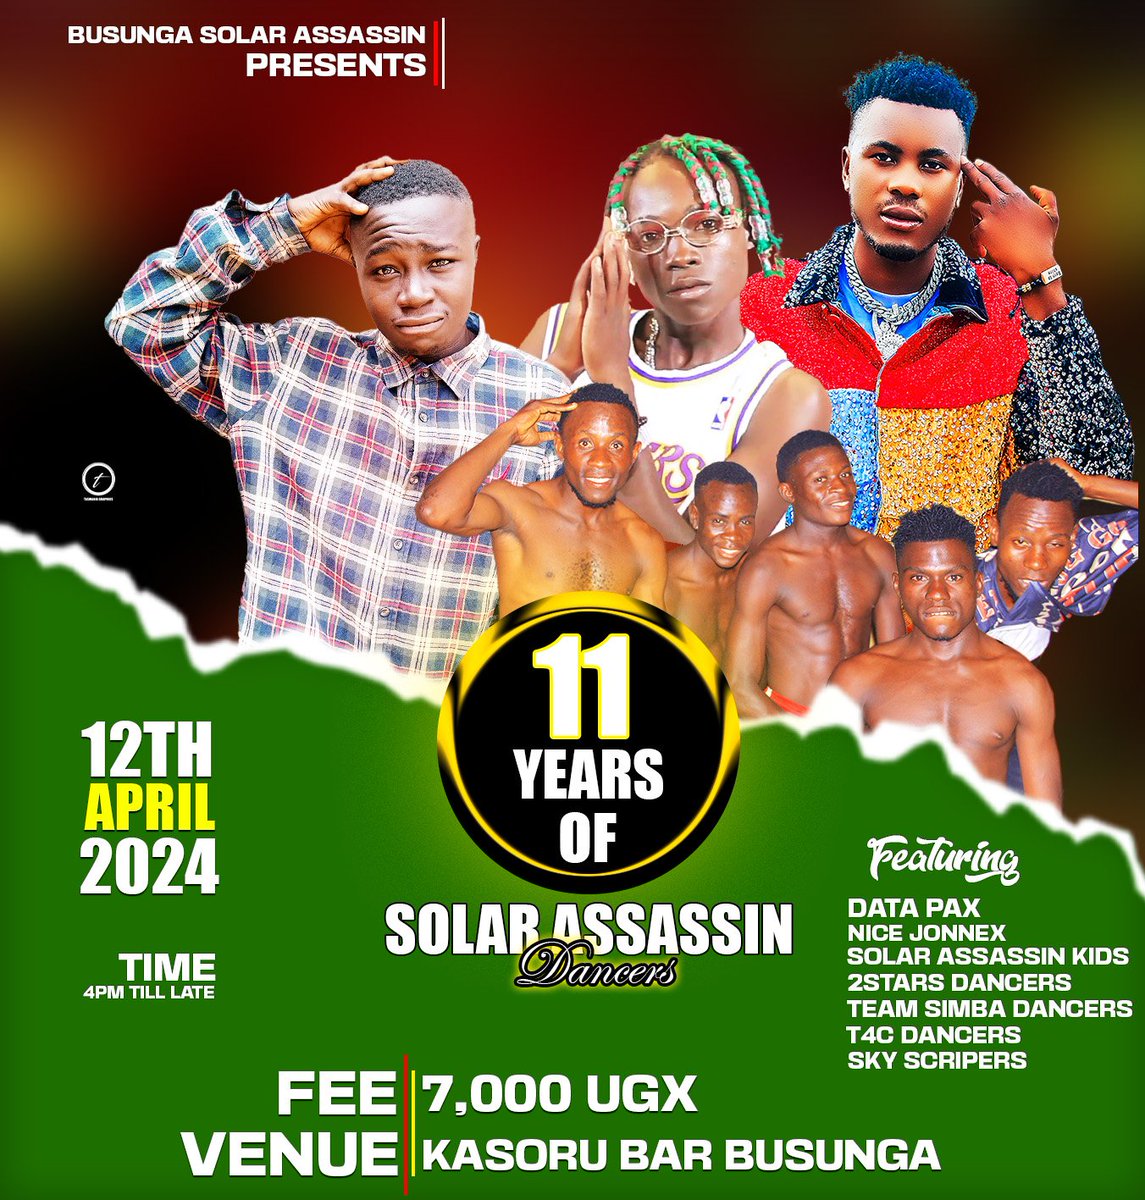 Our Busunga-Bundibugyo people, we are supporting our own Solar Assassin Dancer this Friday. 
They have Entertained us for 11 years, let's appreciate them. Kindly be there!  
'#One_Team_One_Goal'
'#Harnessing_and_Thriving_Talents'
'A Profitable Art and Fashion Industry for Us All'